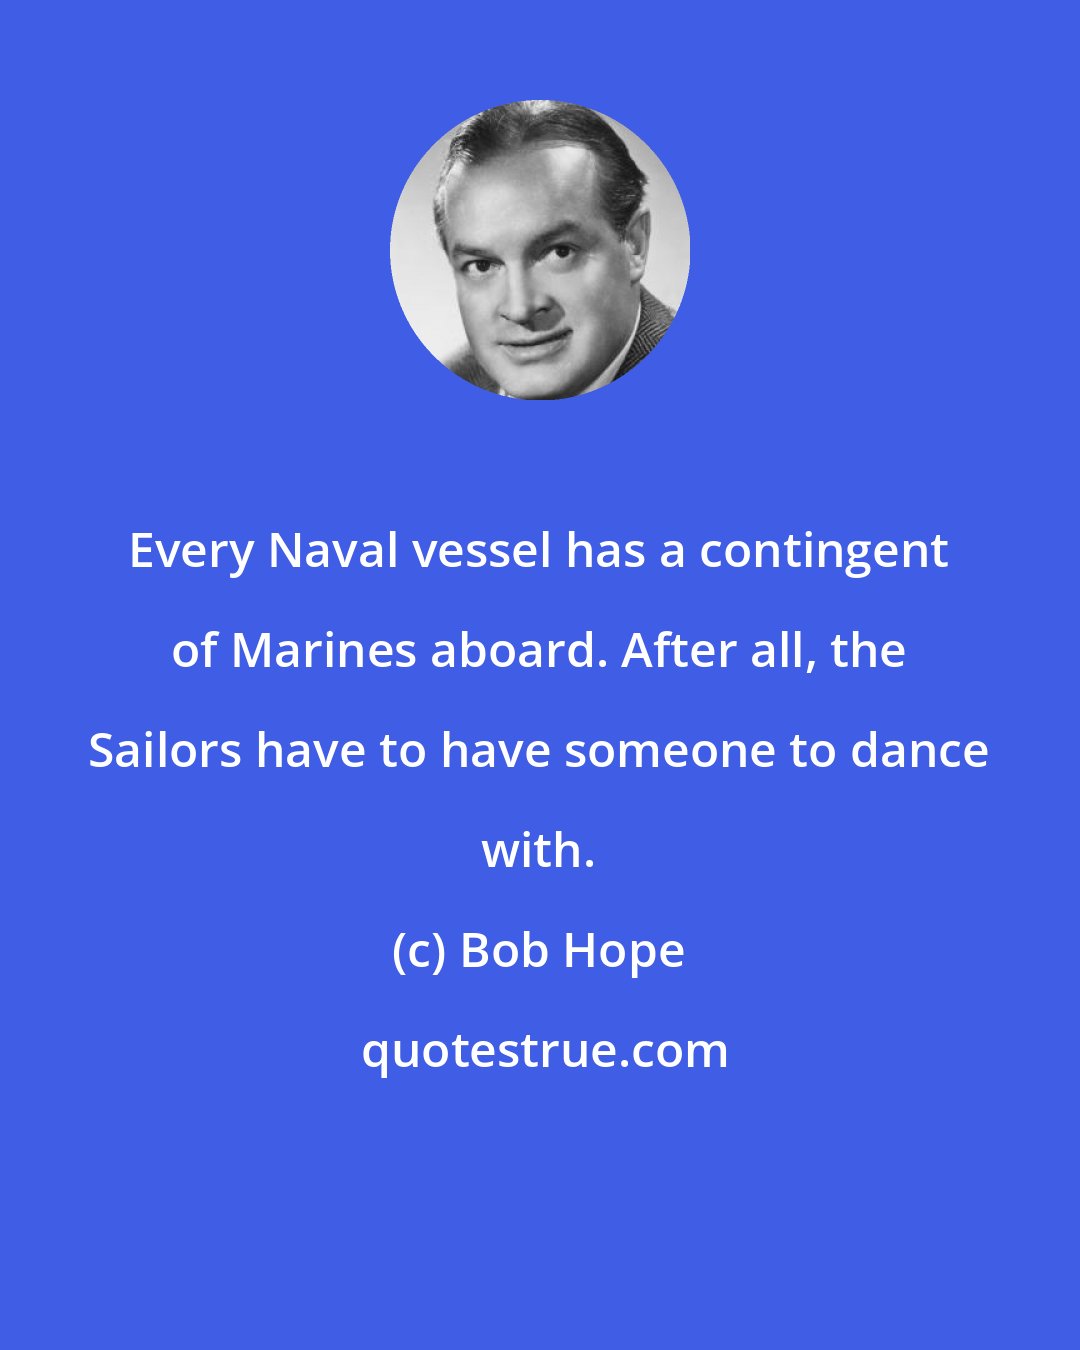 Bob Hope: Every Naval vessel has a contingent of Marines aboard. After all, the Sailors have to have someone to dance with.